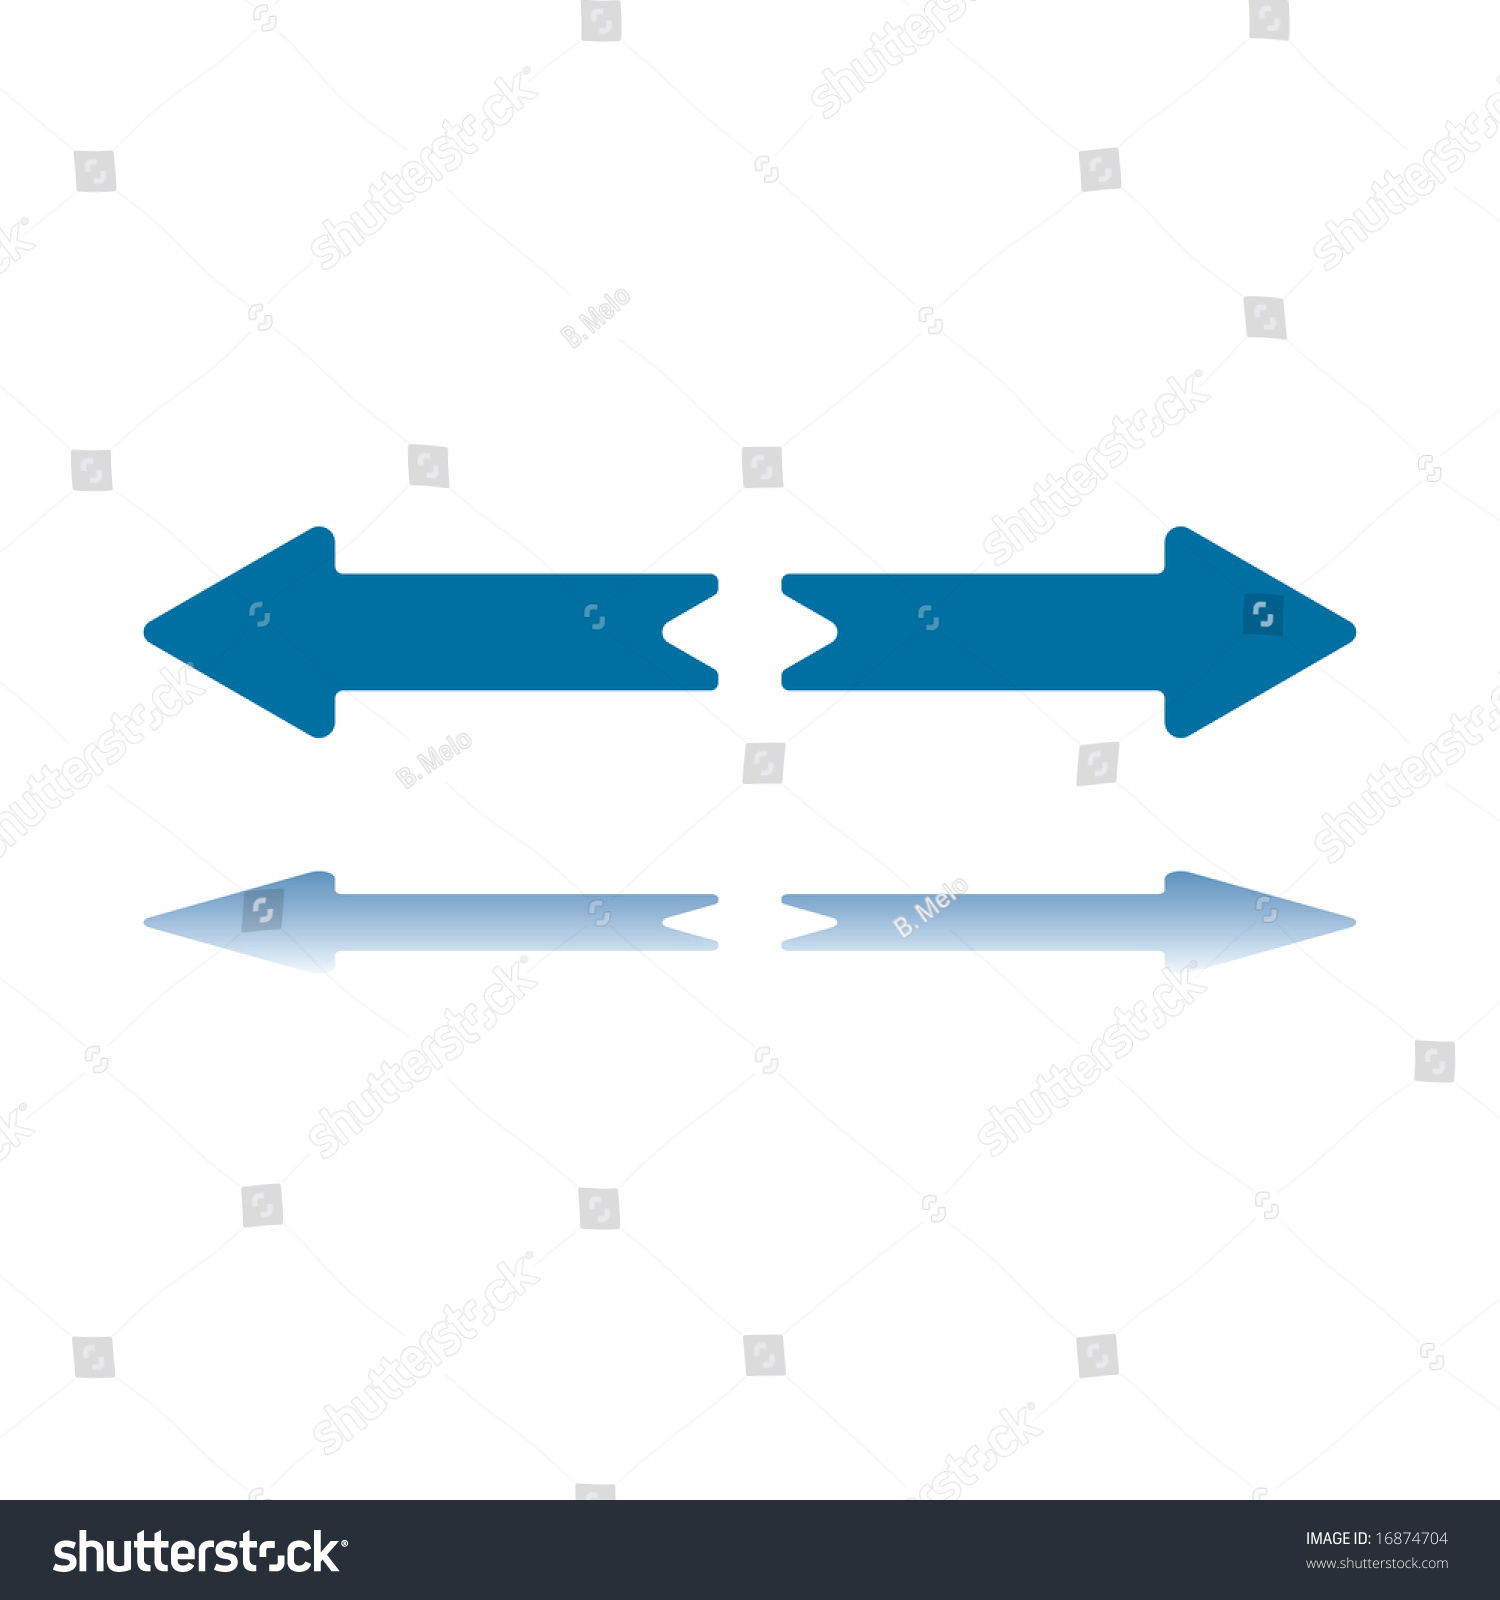 Two Aligned Horizontal Arrows Pointing Opposite Stock Vector 16874704